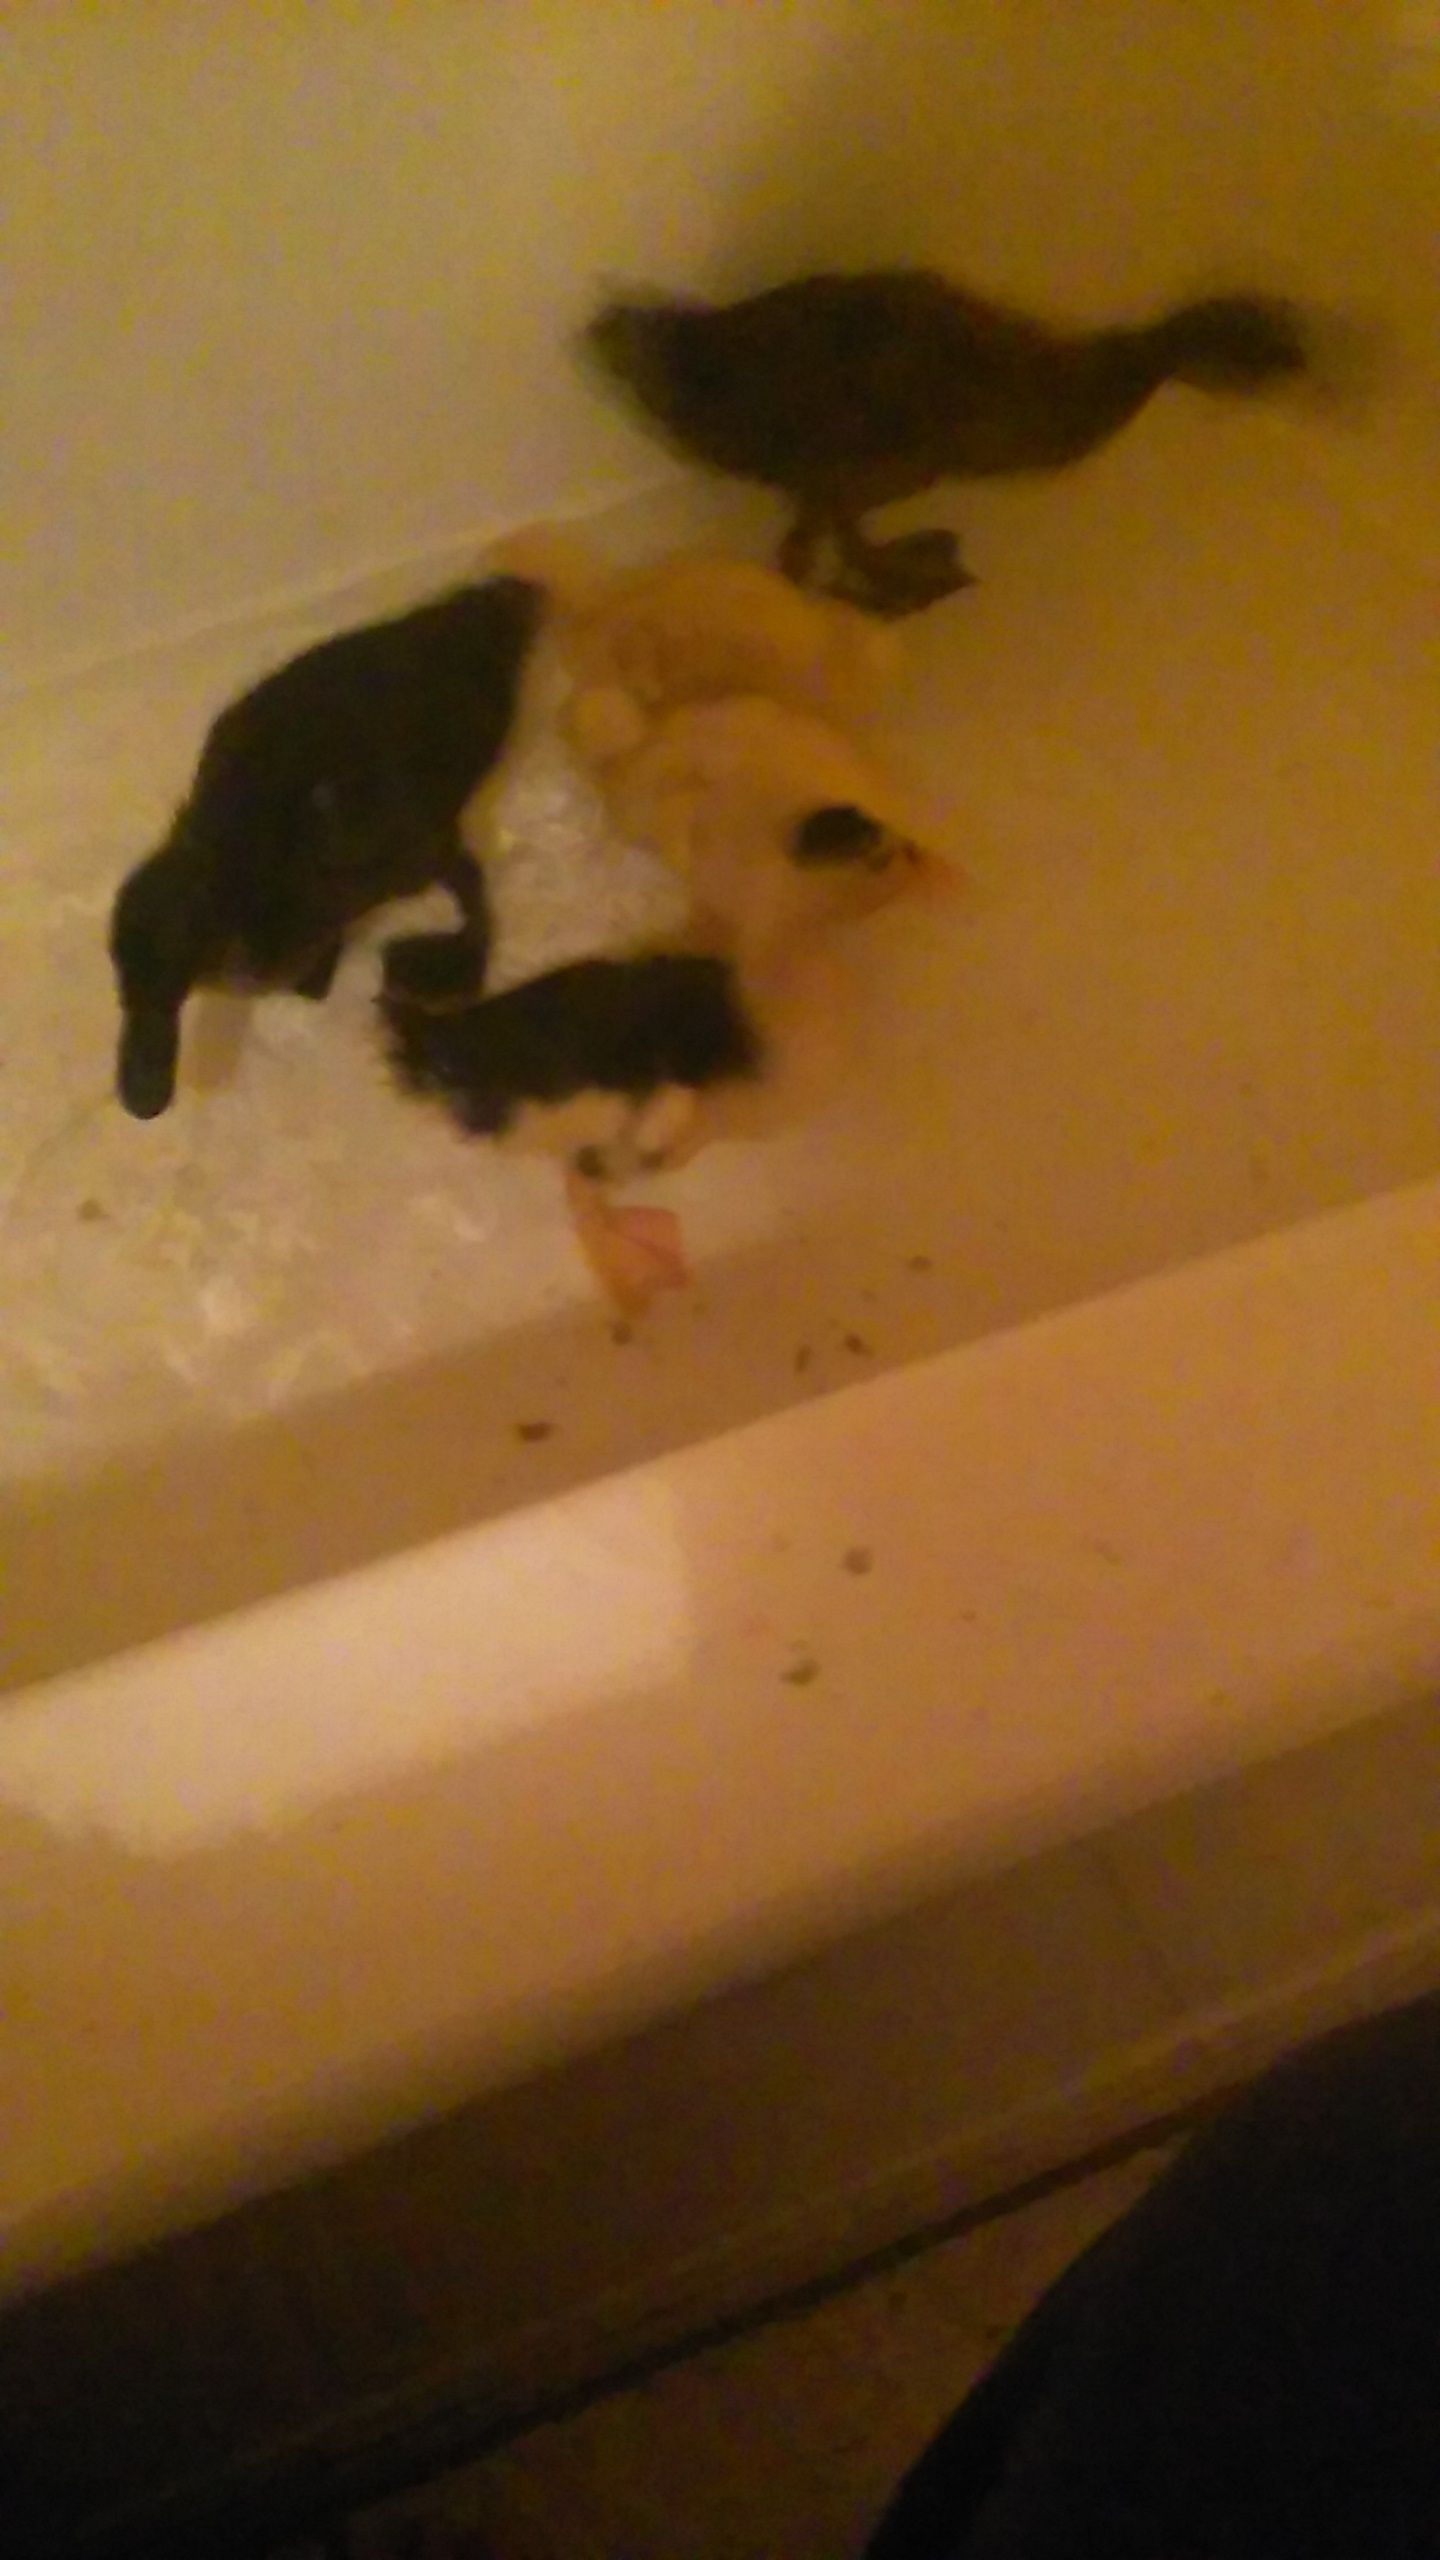 Bath time for the baby ducks